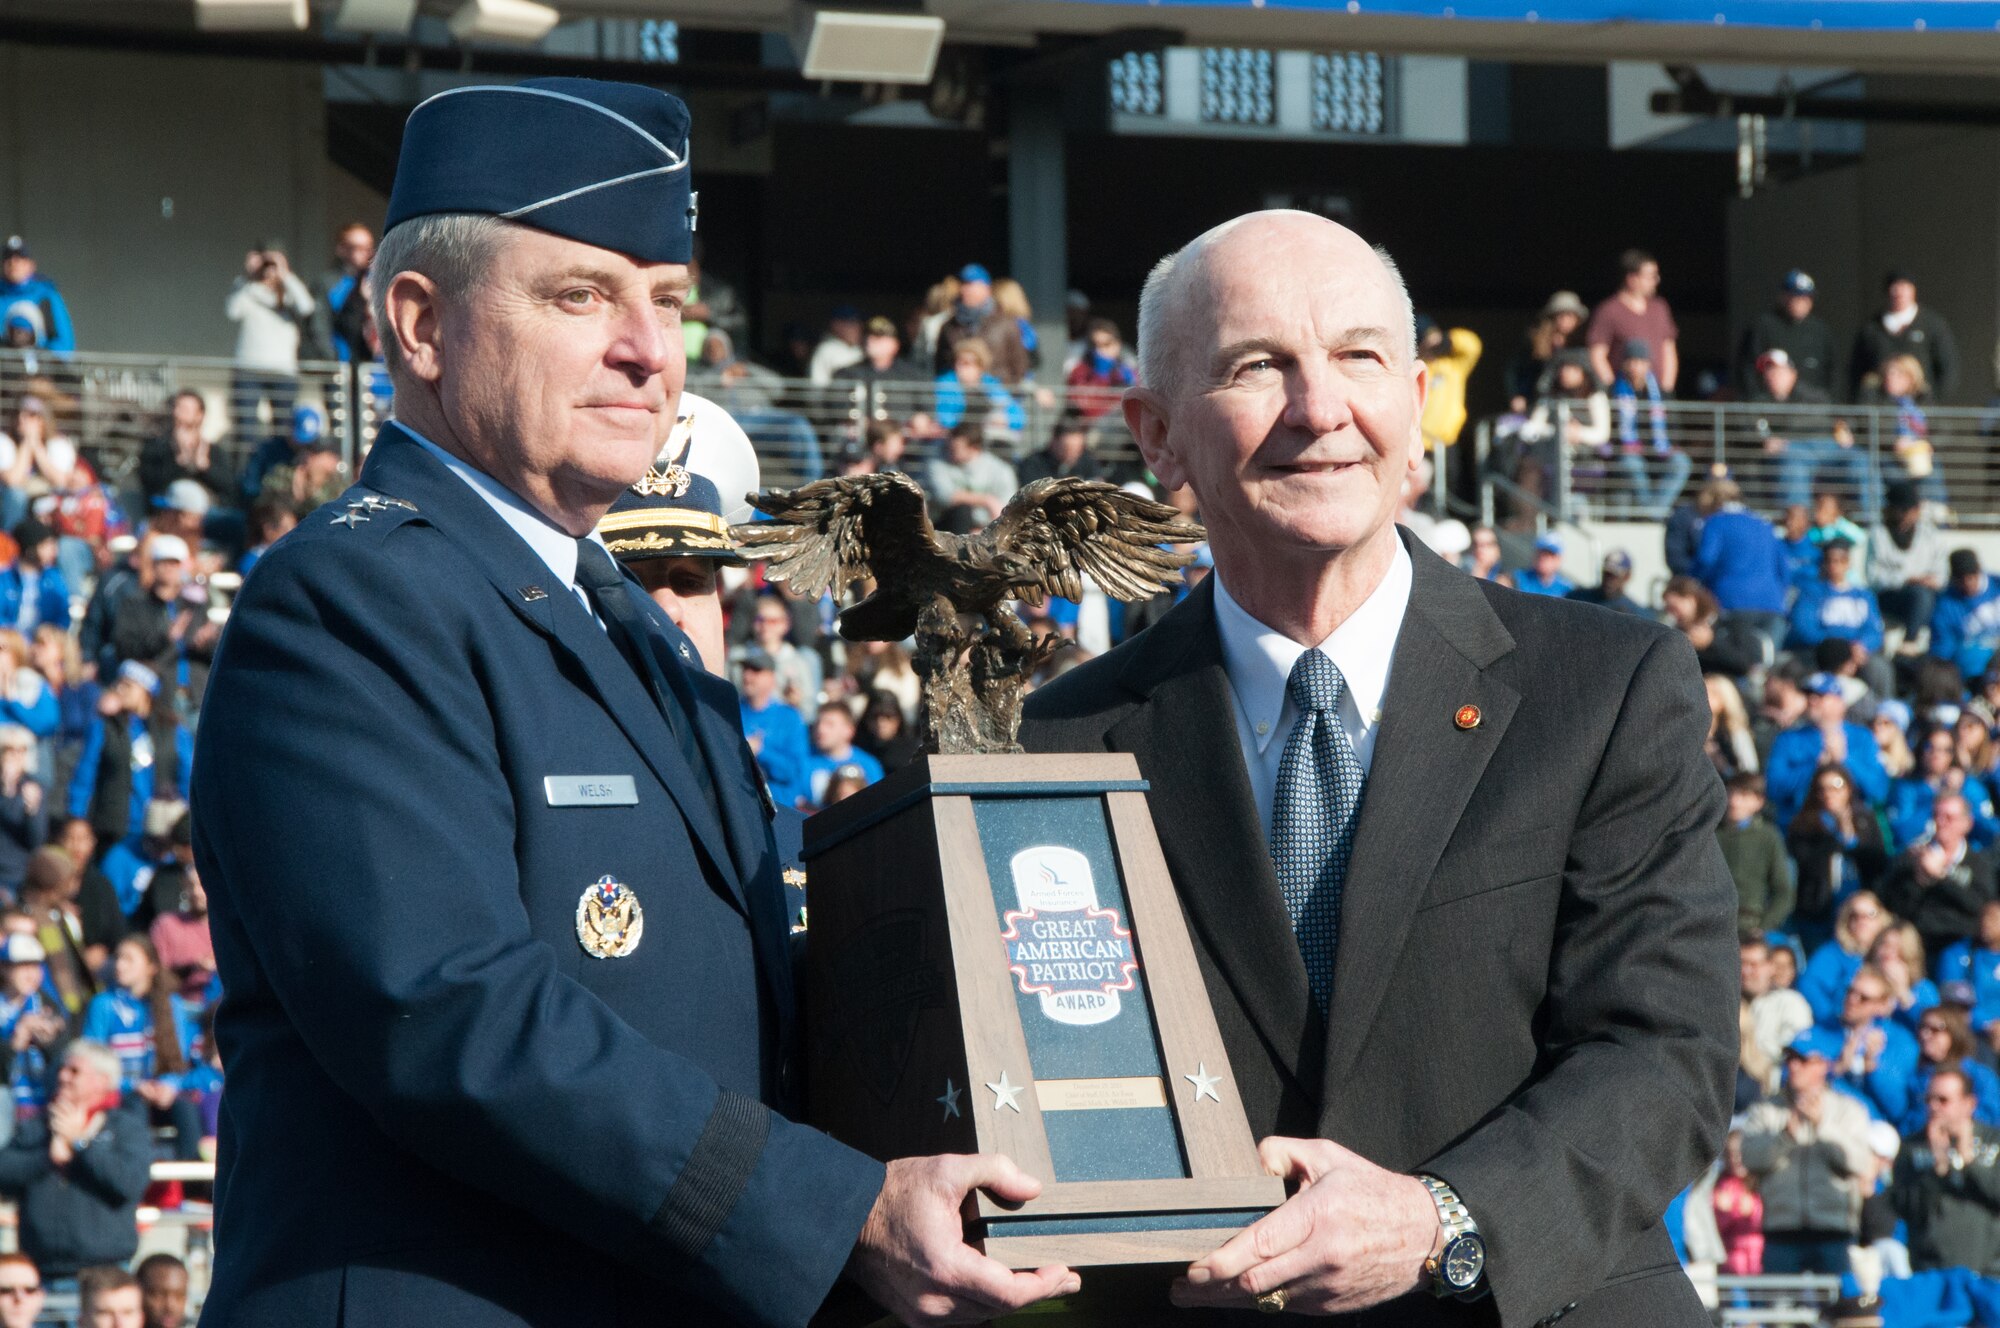 NAVAL AIR STATION FORT WORTH JOINT RESERVE BASE, Texas - Air Force Chief of Staff Gen. Mark A. Welsh III receives the Great American Patriot Award during the Lockheed Martin Armed Forces Bowl at Amon G. Carter Stadium, Fort Worth, Texas, Dec. 29. Welsh received the award in recognition of exemplary service to the United States of America. Retired Marine Gen. Garry L. Parks, chairman of Armed Forces Insurance, presented the award. (U.S. Air Force photo by Staff Sgt. Melissa Harvey)